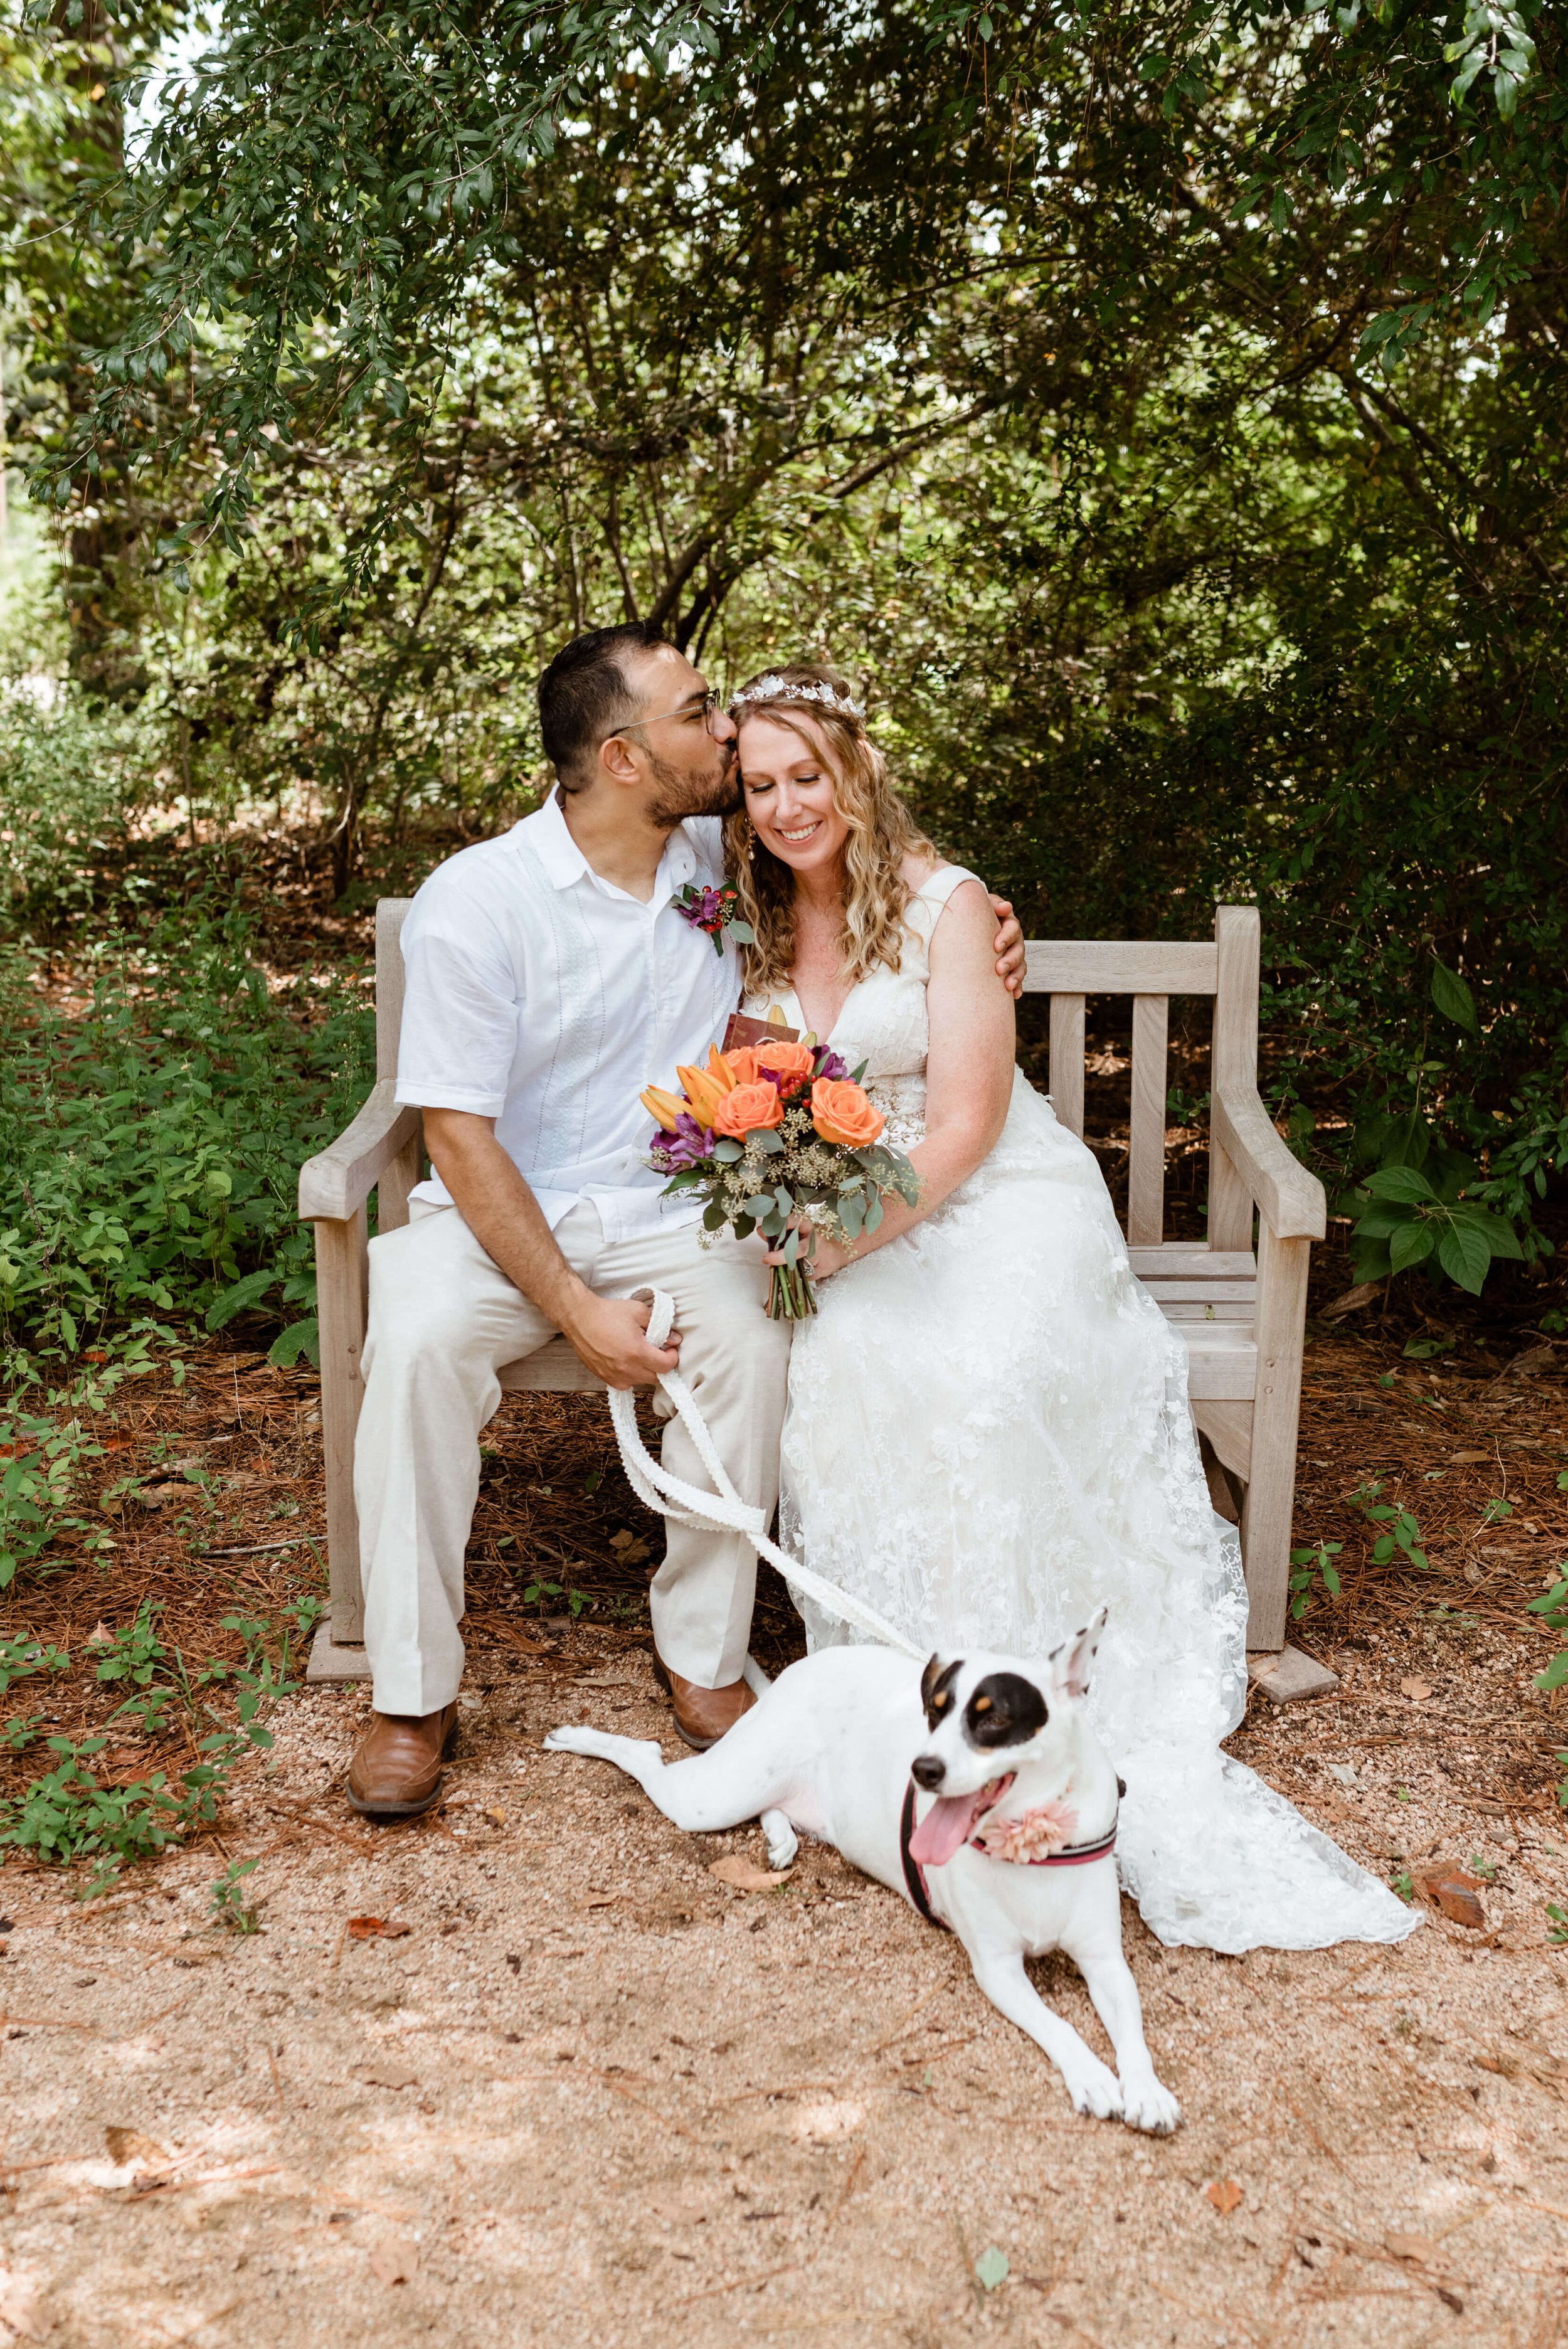 Beautiful elopement with dog photographed by J. Andrade Visual Arts | Houston Elopement and Dog photographer